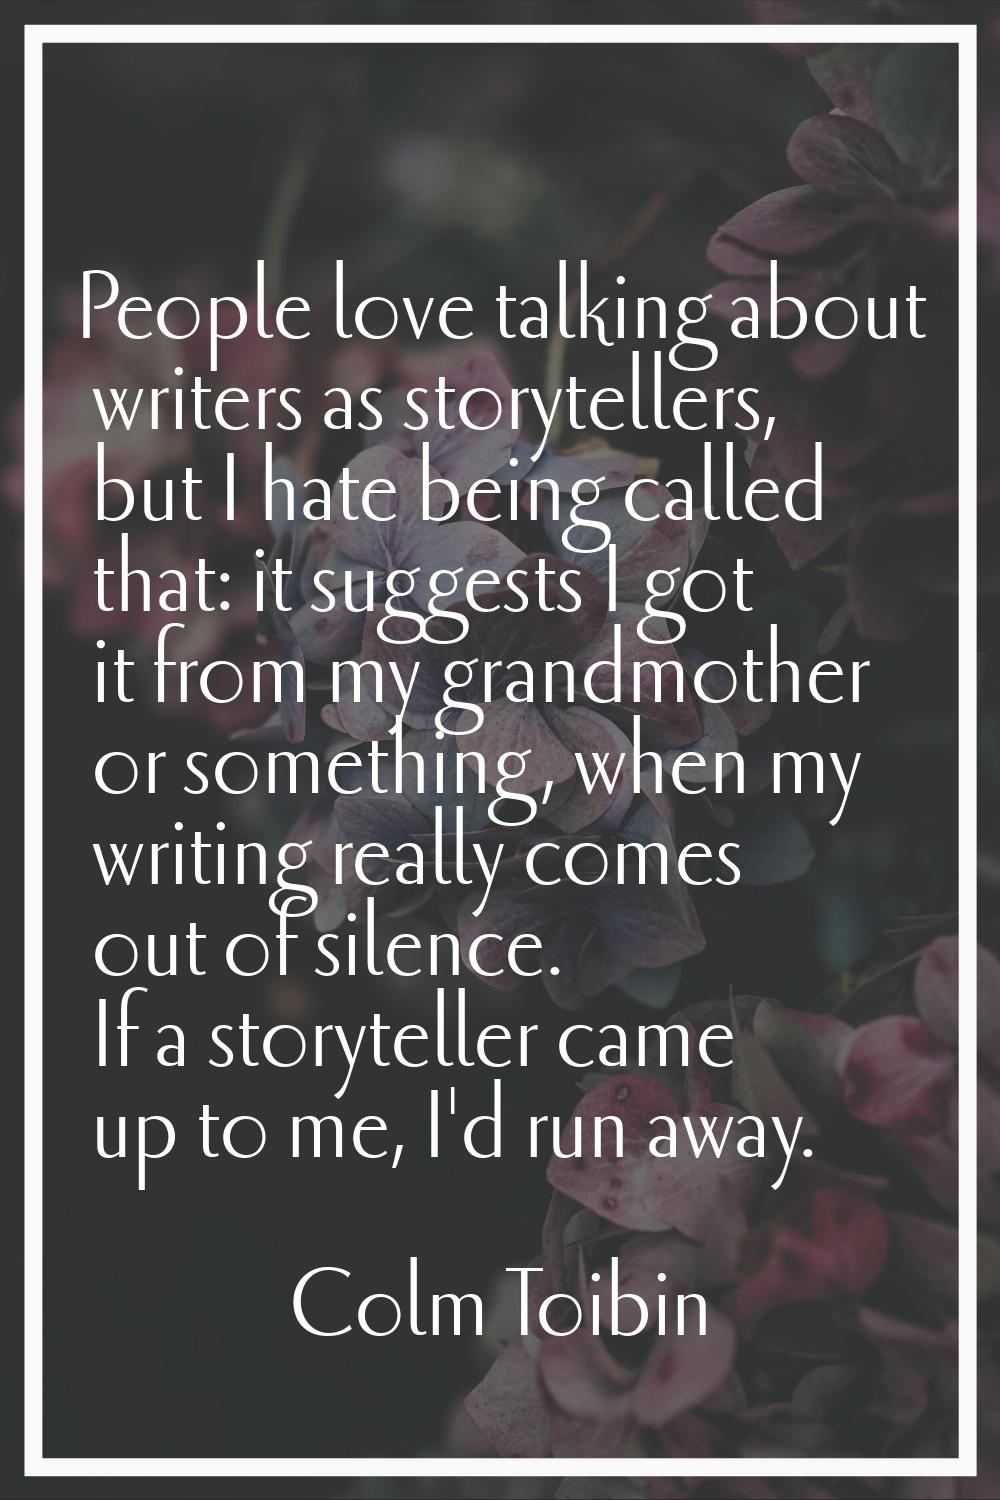 People love talking about writers as storytellers, but I hate being called that: it suggests I got 